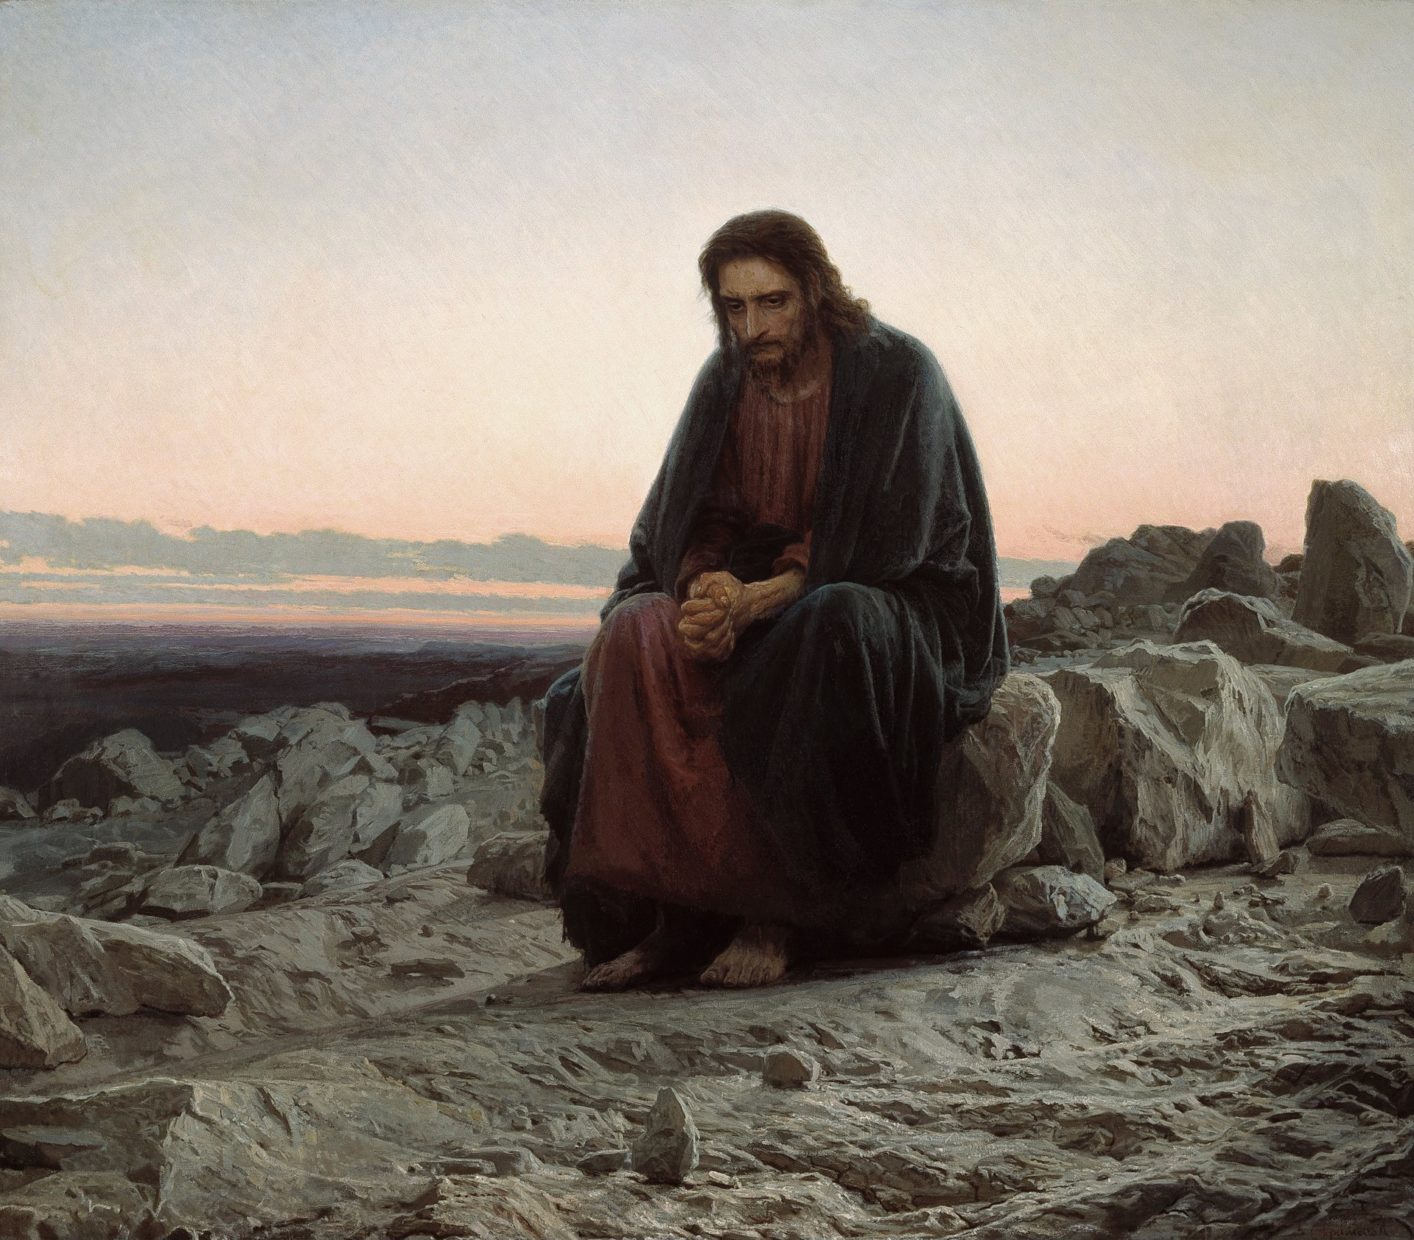 Christ in Wilderness (1872) – The Main Story